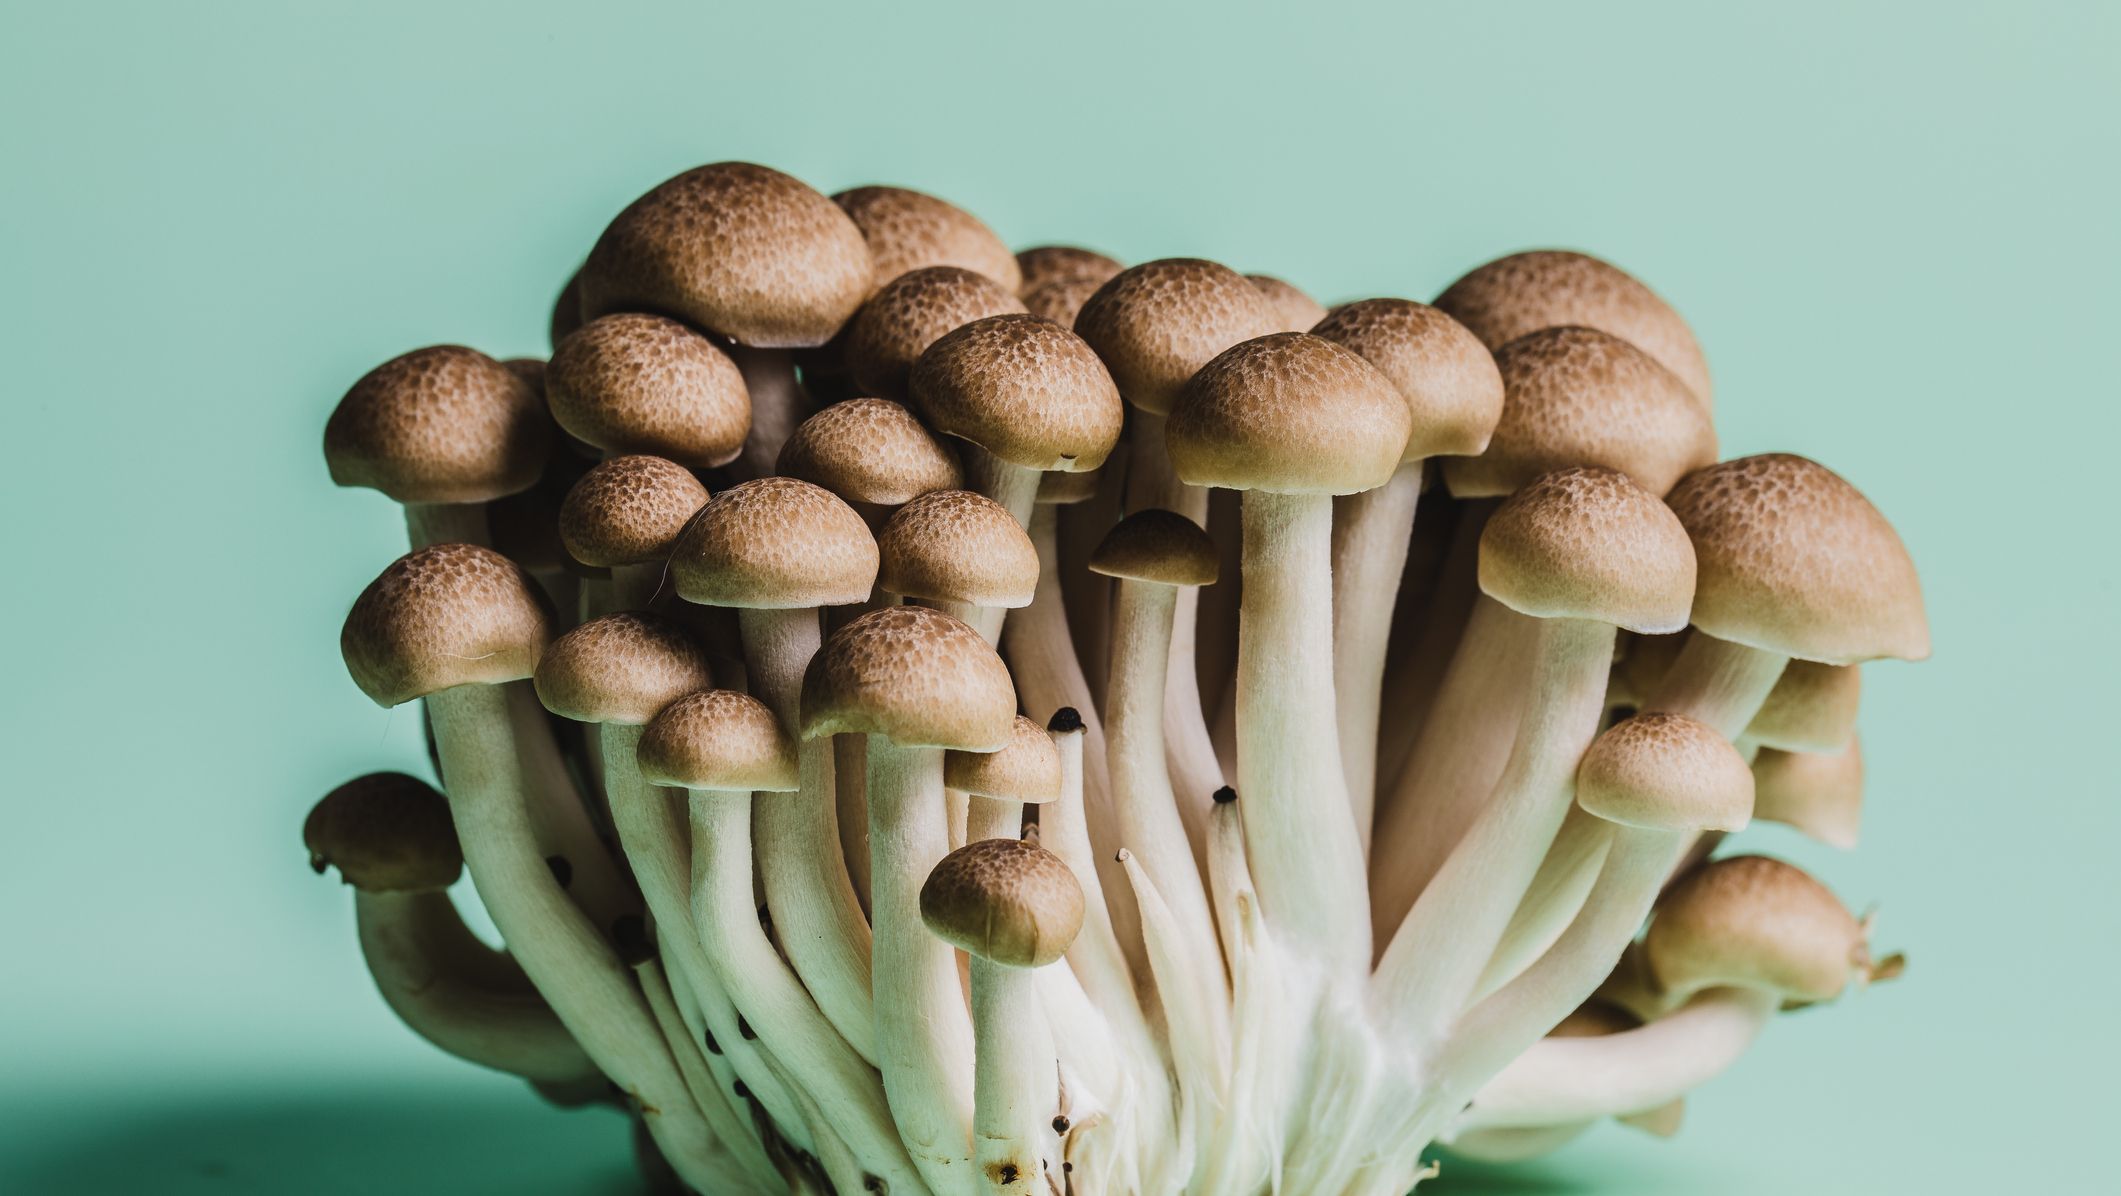 16 Different Types of Mushrooms - Most Common Edible Mushrooms